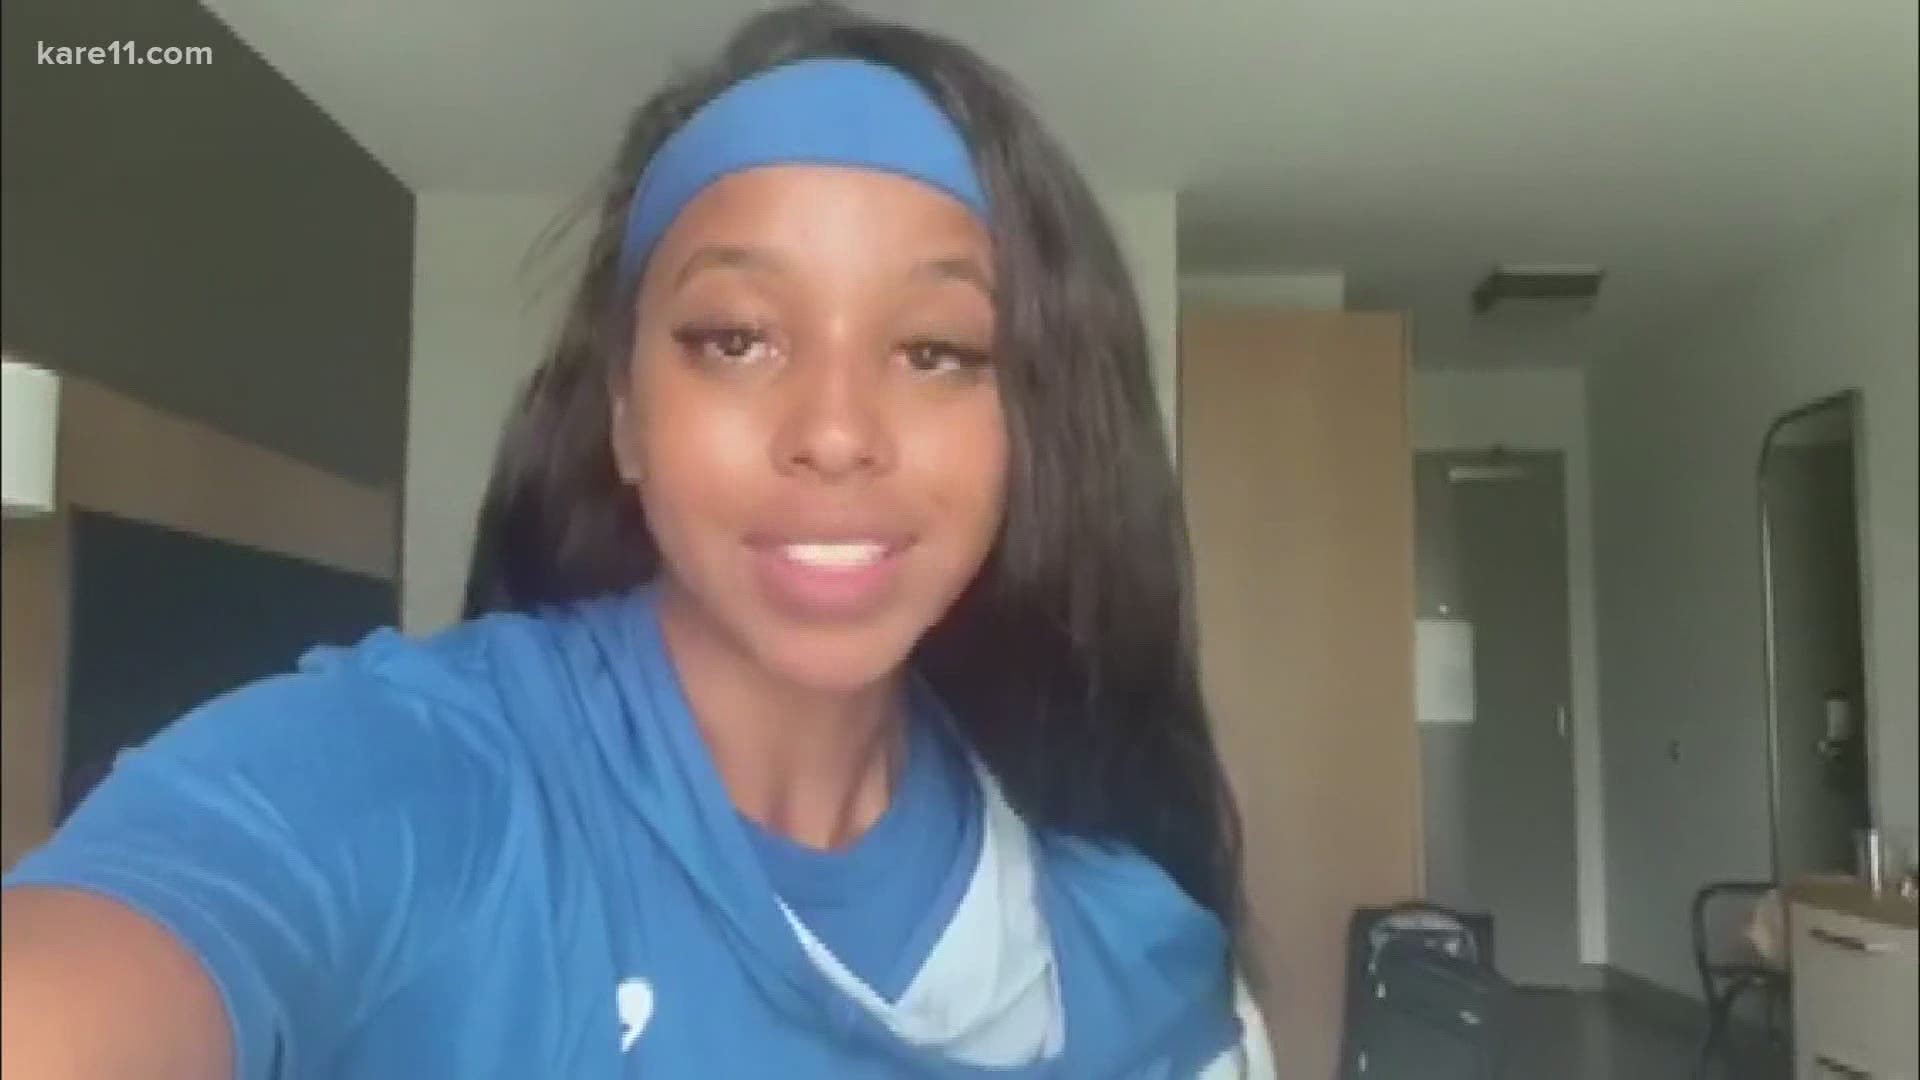 Lexie Brown gives KARE 11 viewers a behind the scenes look at life with the Lynx as they get ready for the upcoming season.